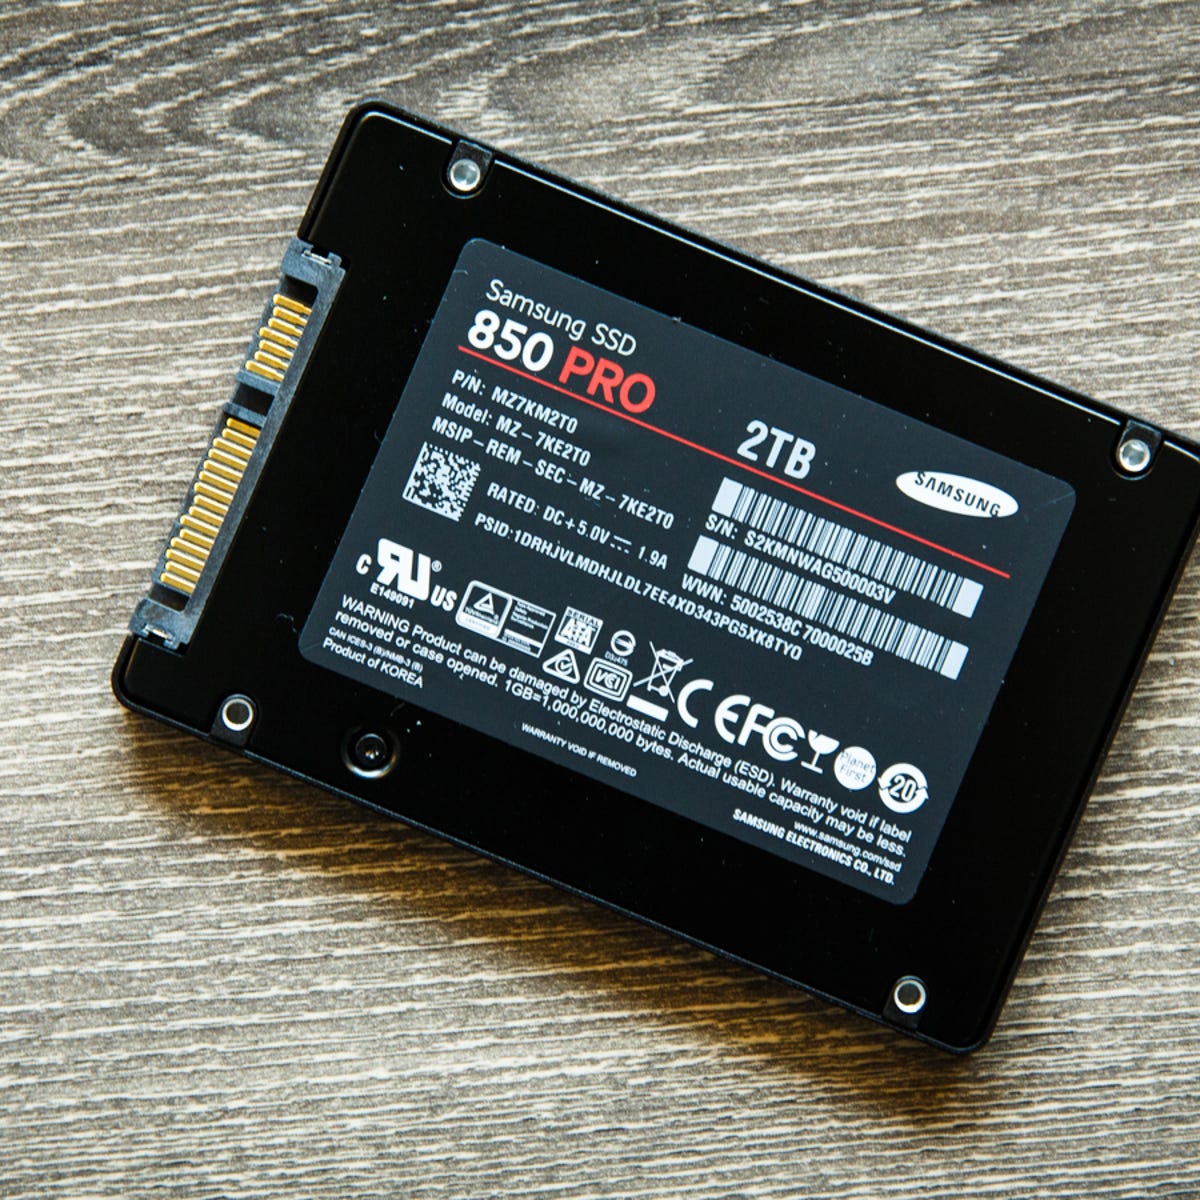 oxiderer Sophie Kan ikke lide Samsung SSD 850 Pro review: Top-notch solid-state drive for a premium price  - CNET